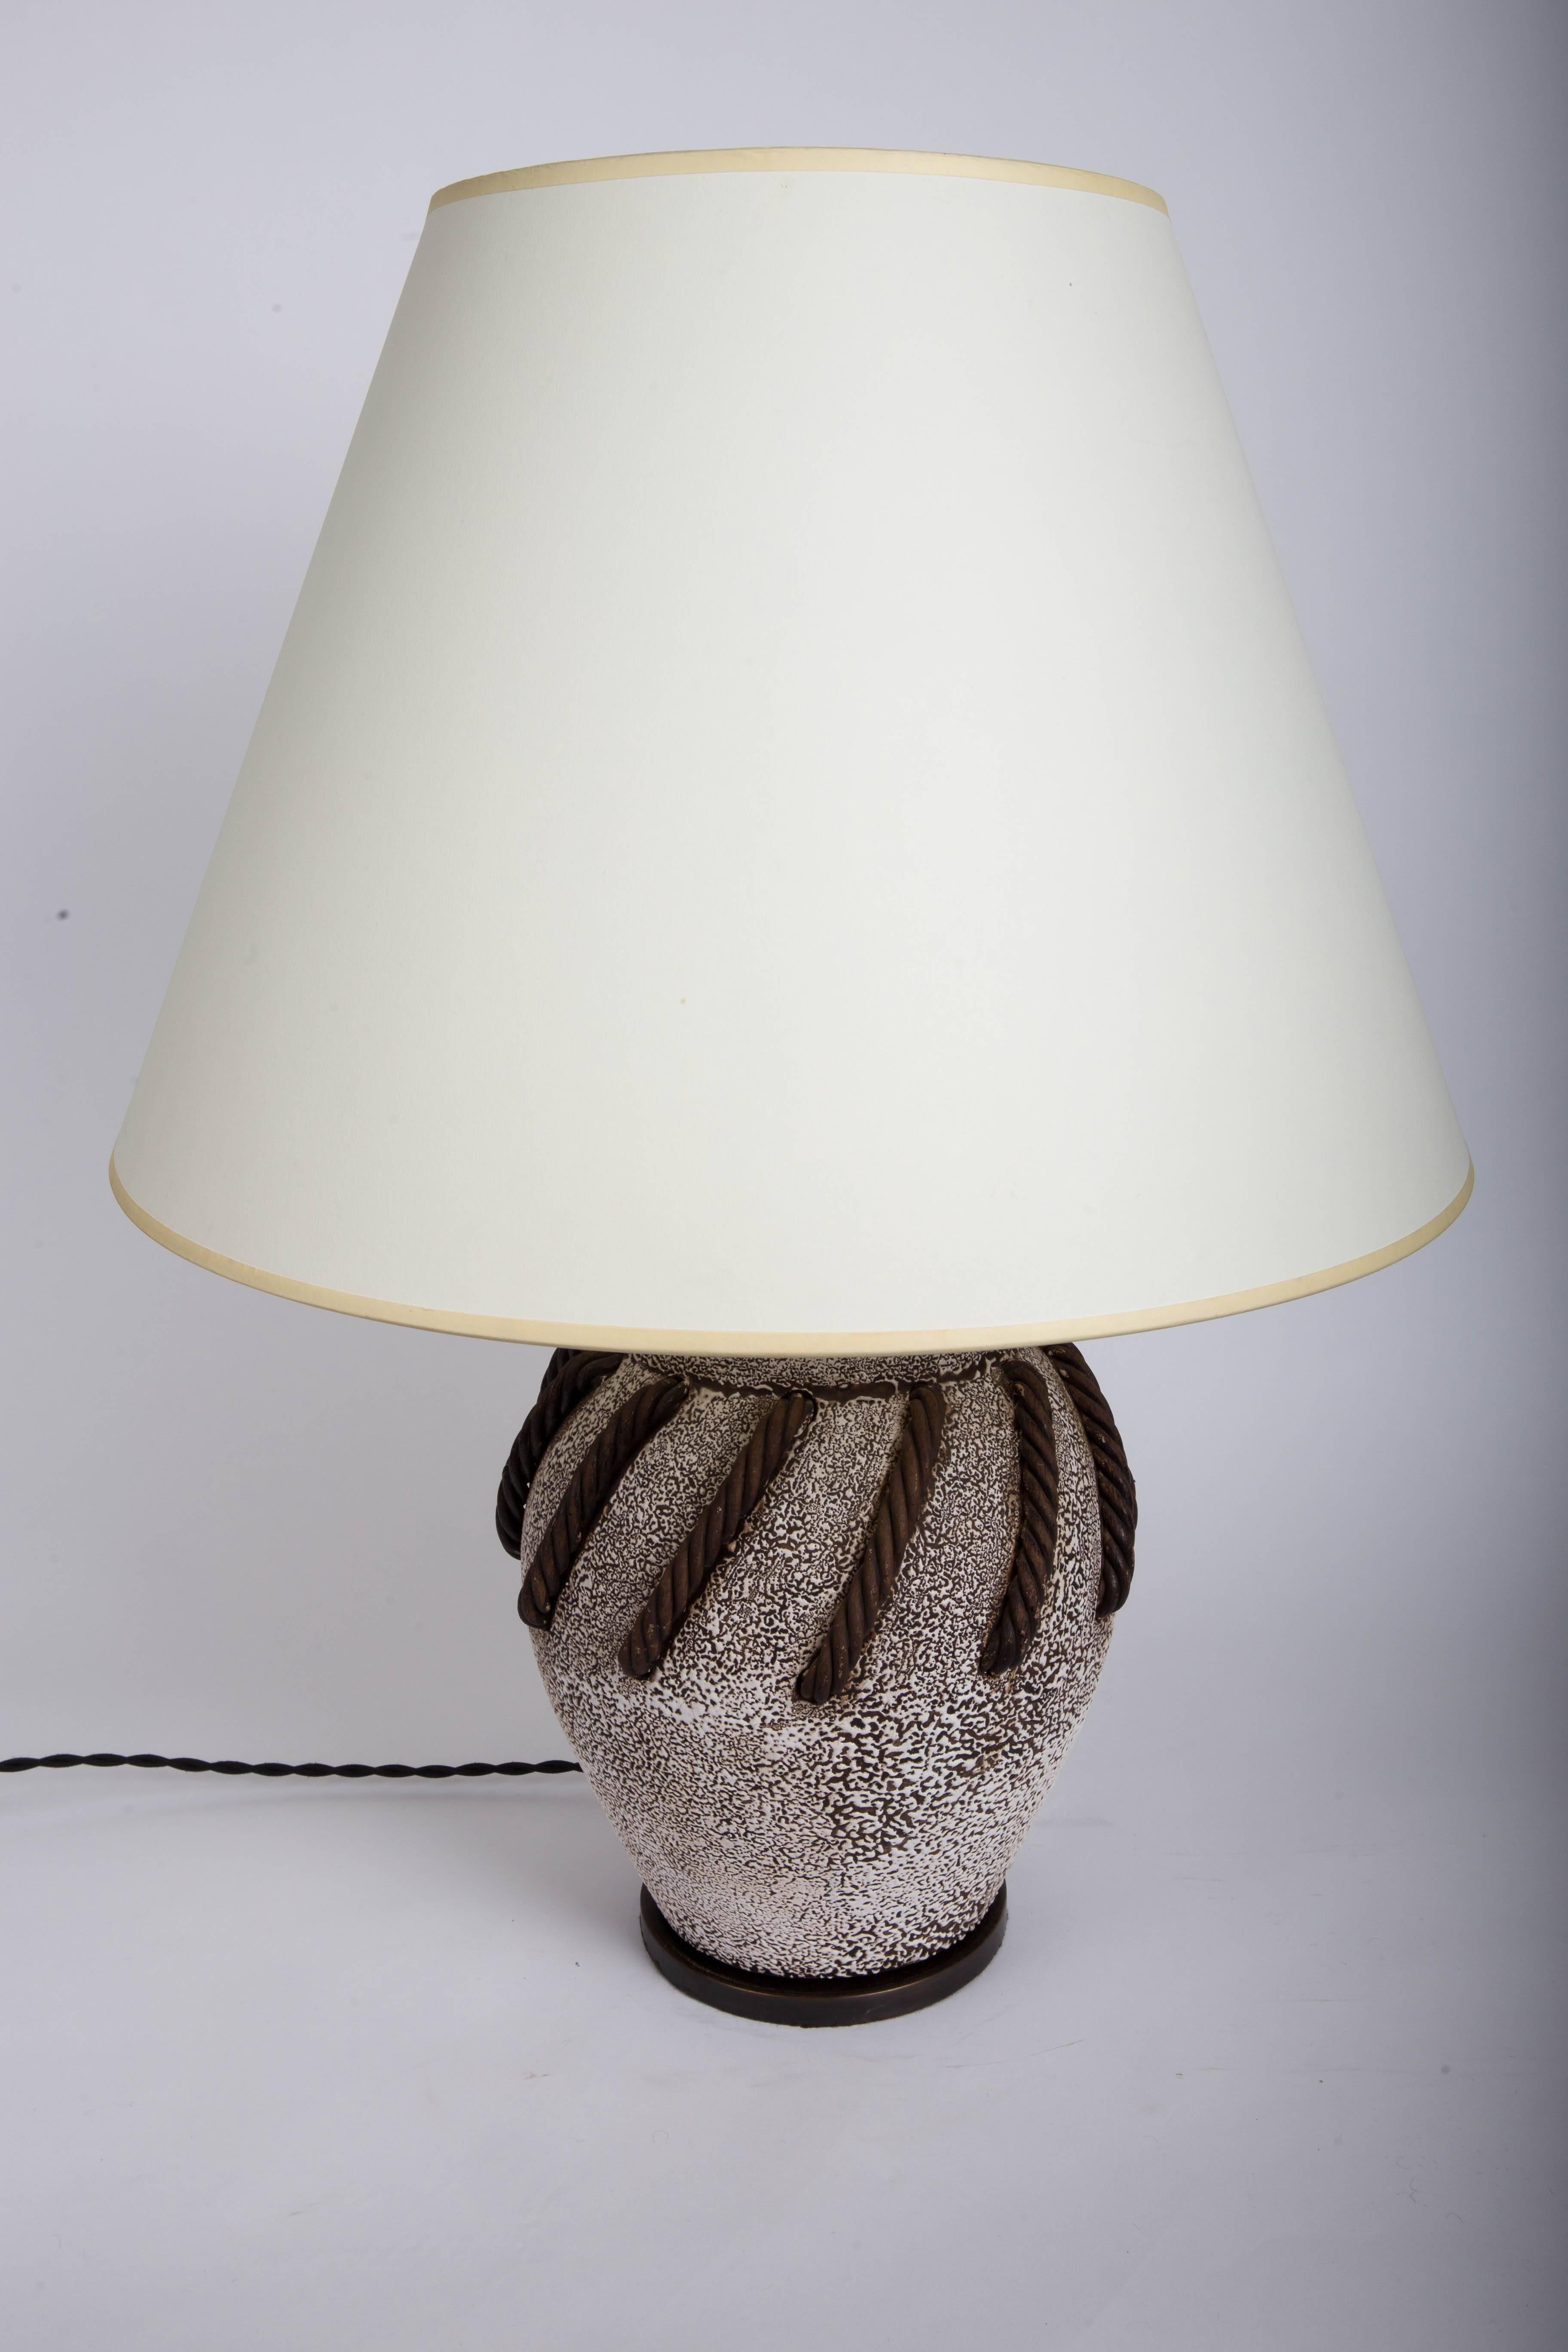 Textured Brown + White Ceramic Lamp with Rope Detailing 2